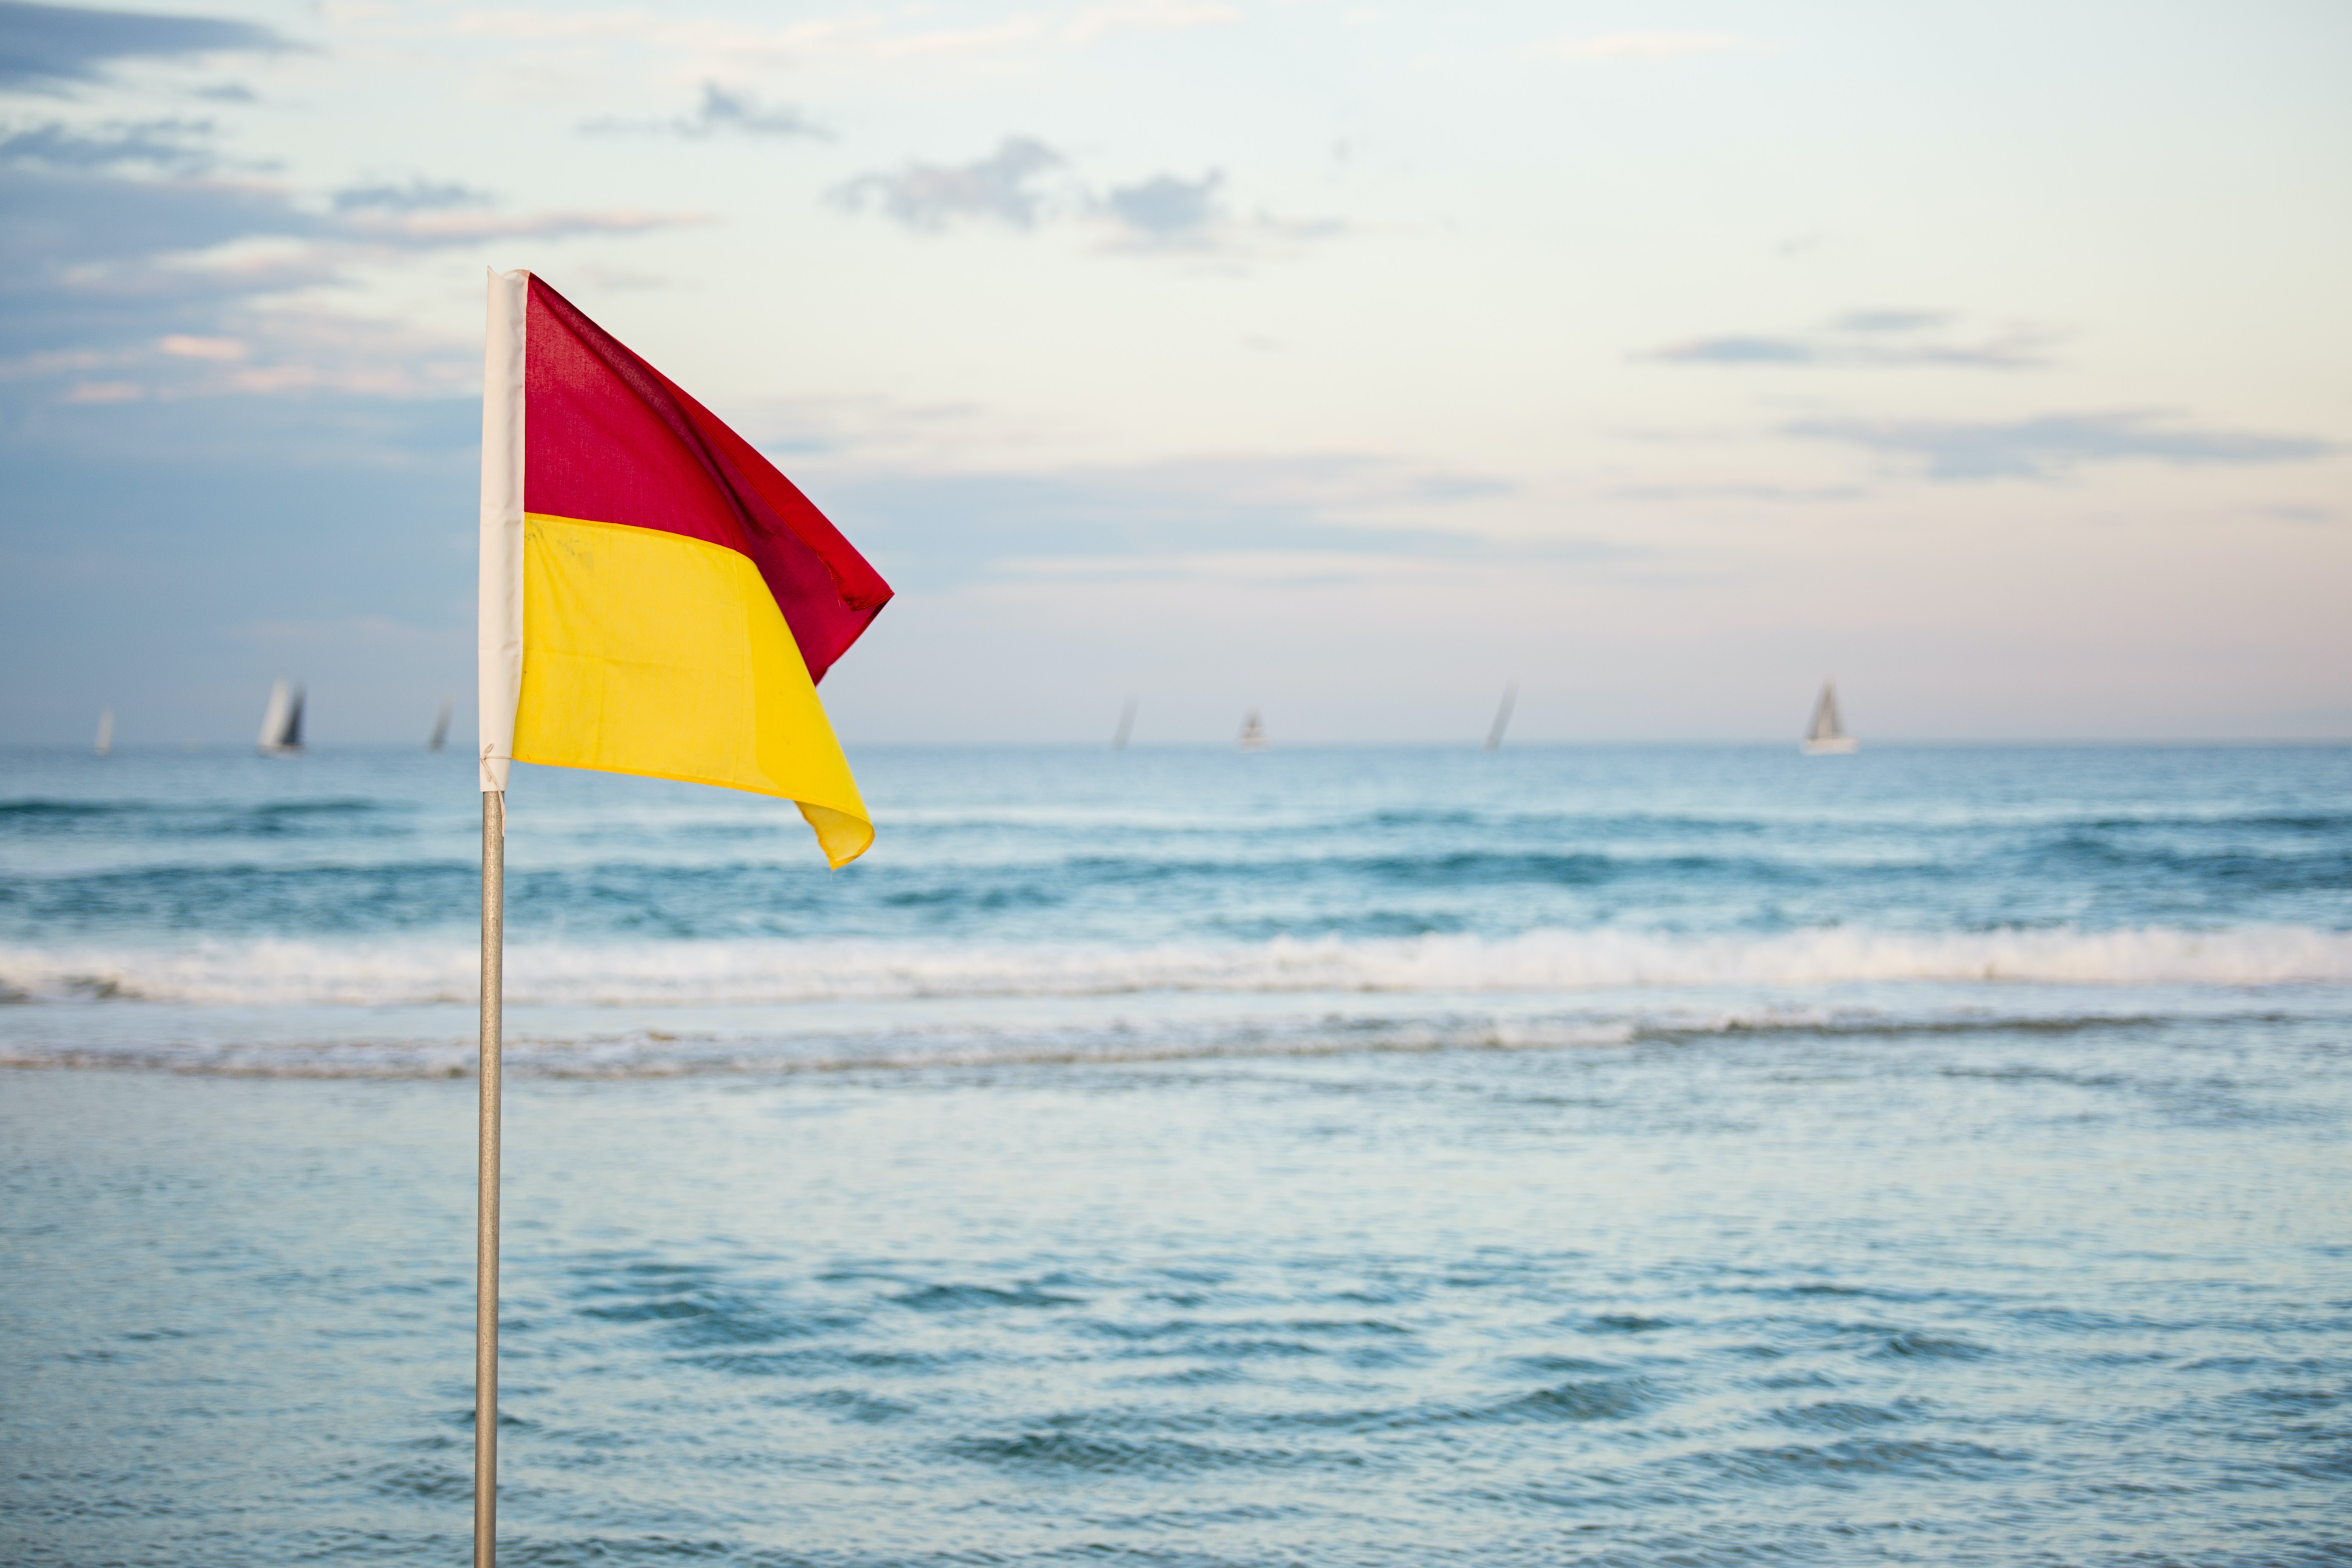 Flags reminded beach-goers of the real meaning of holidays